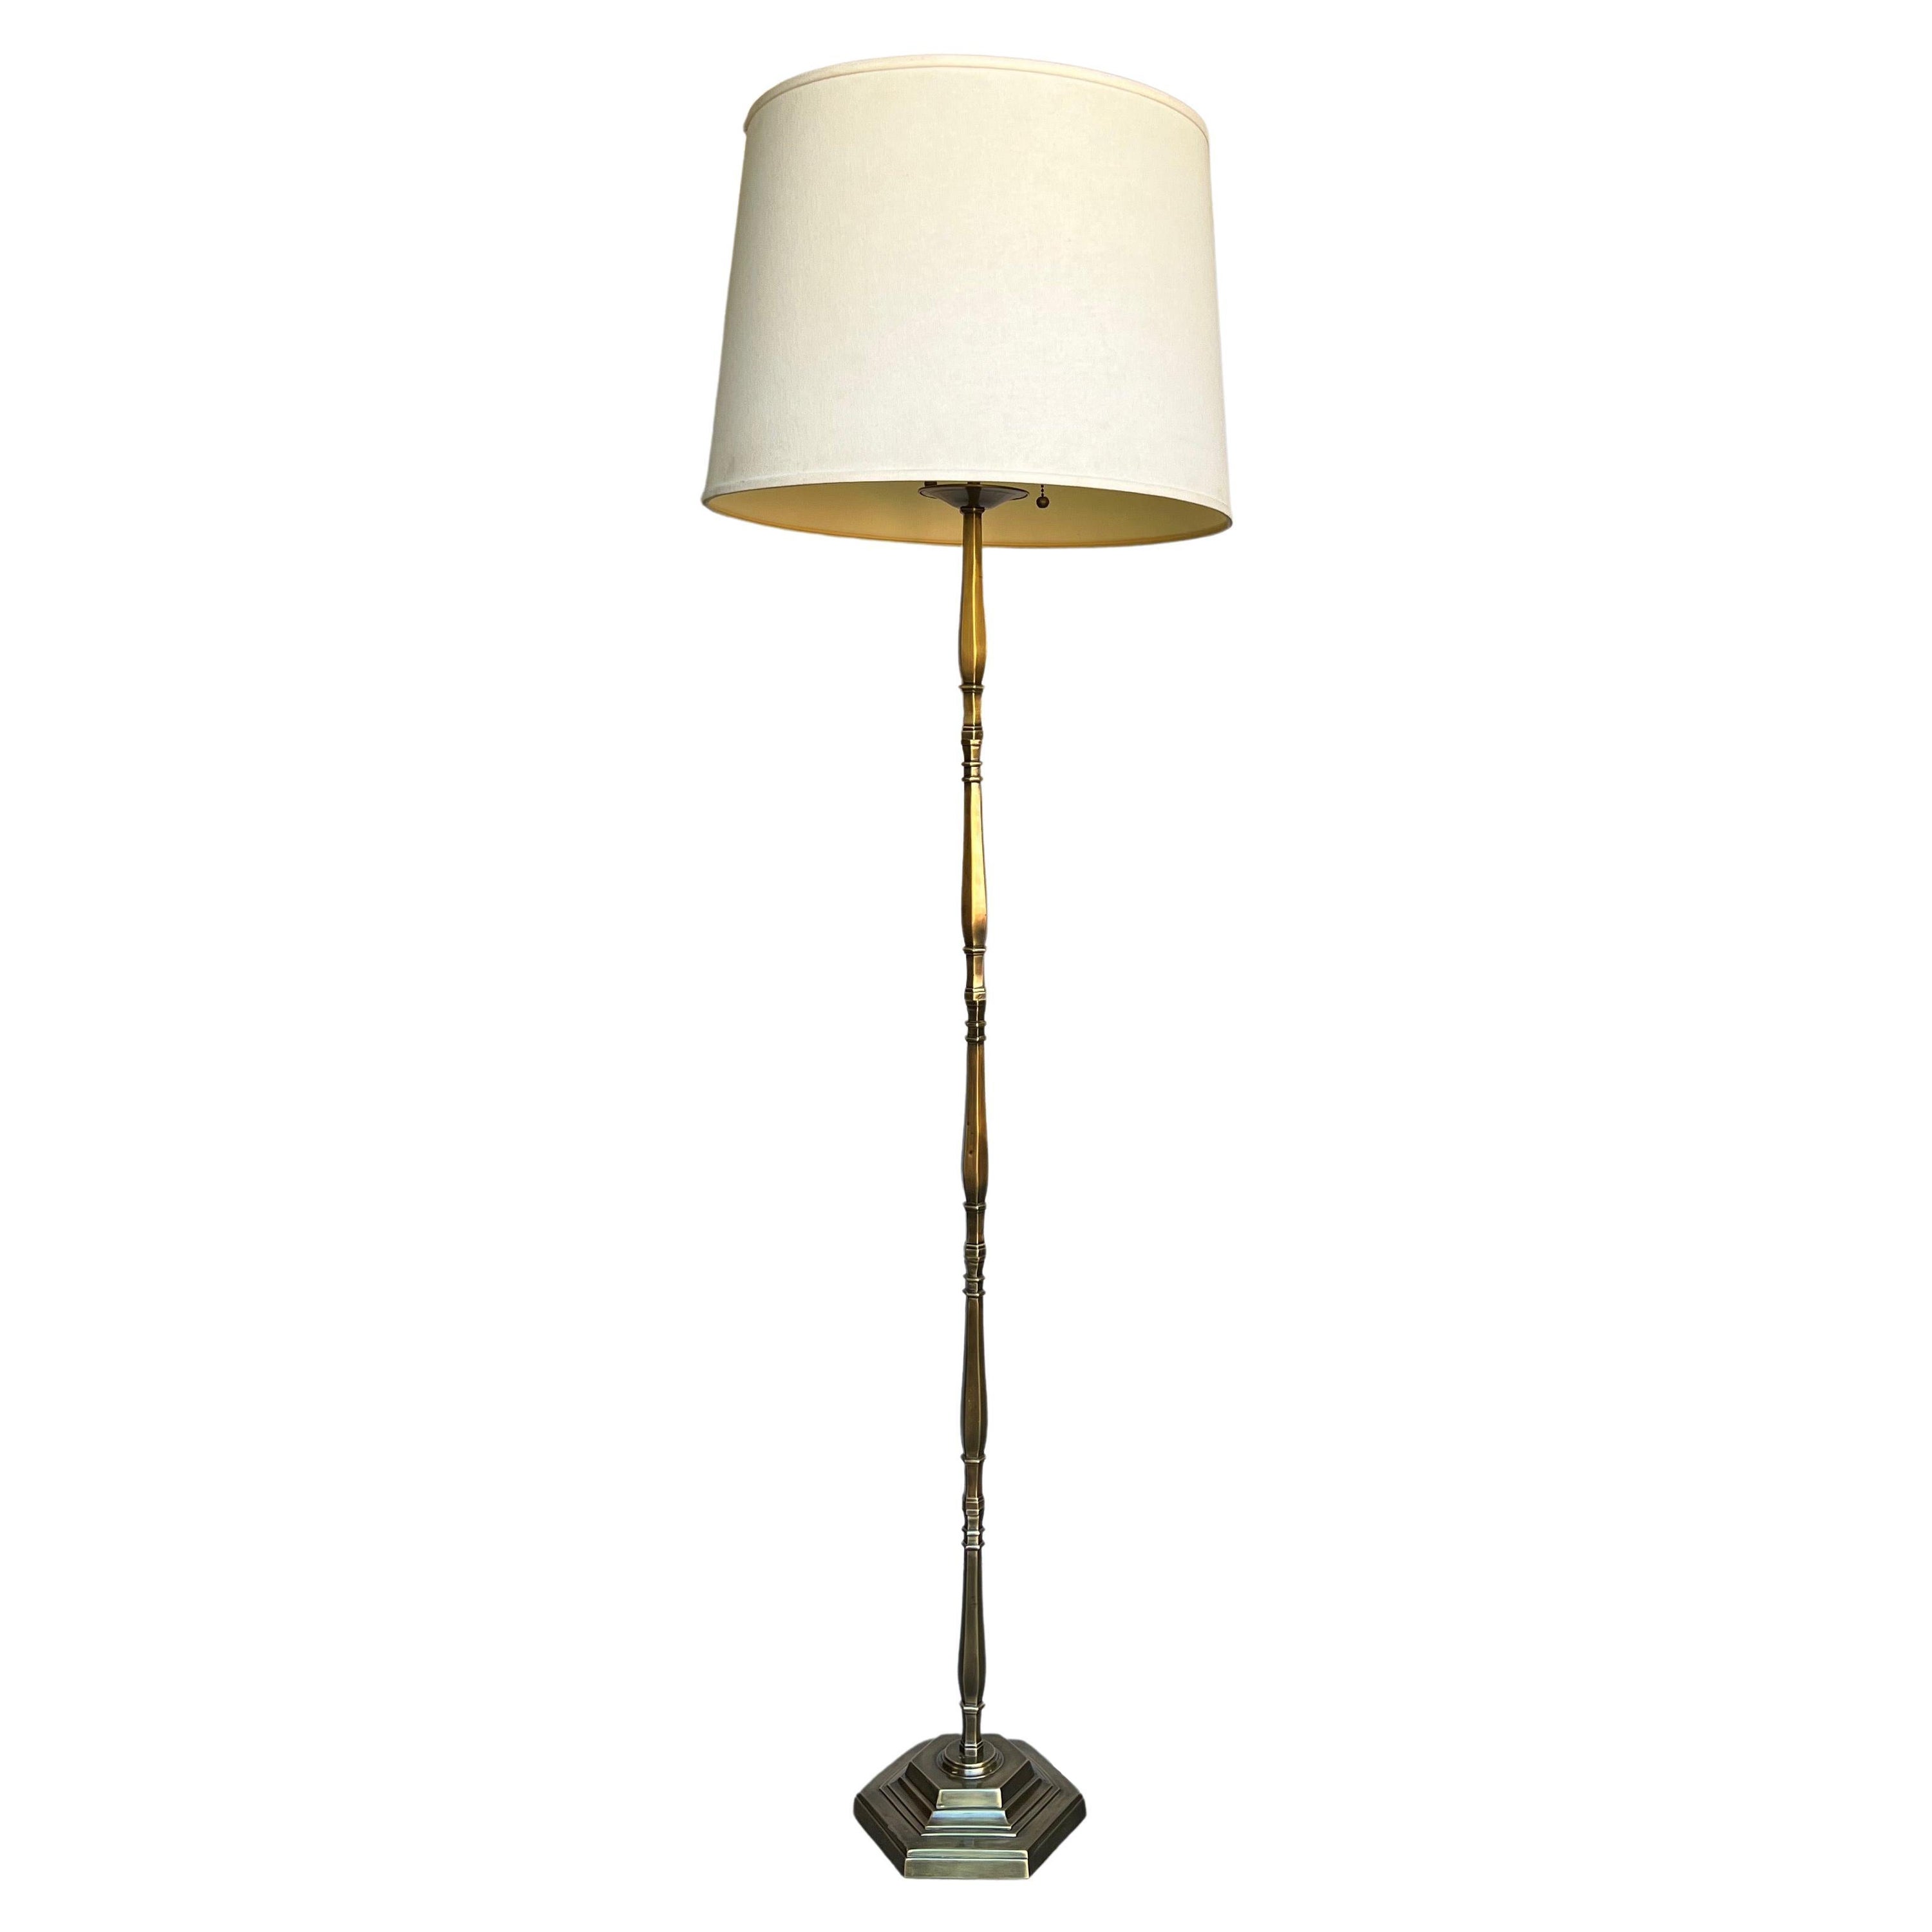 French Floor Lamp with Hexagonal Base